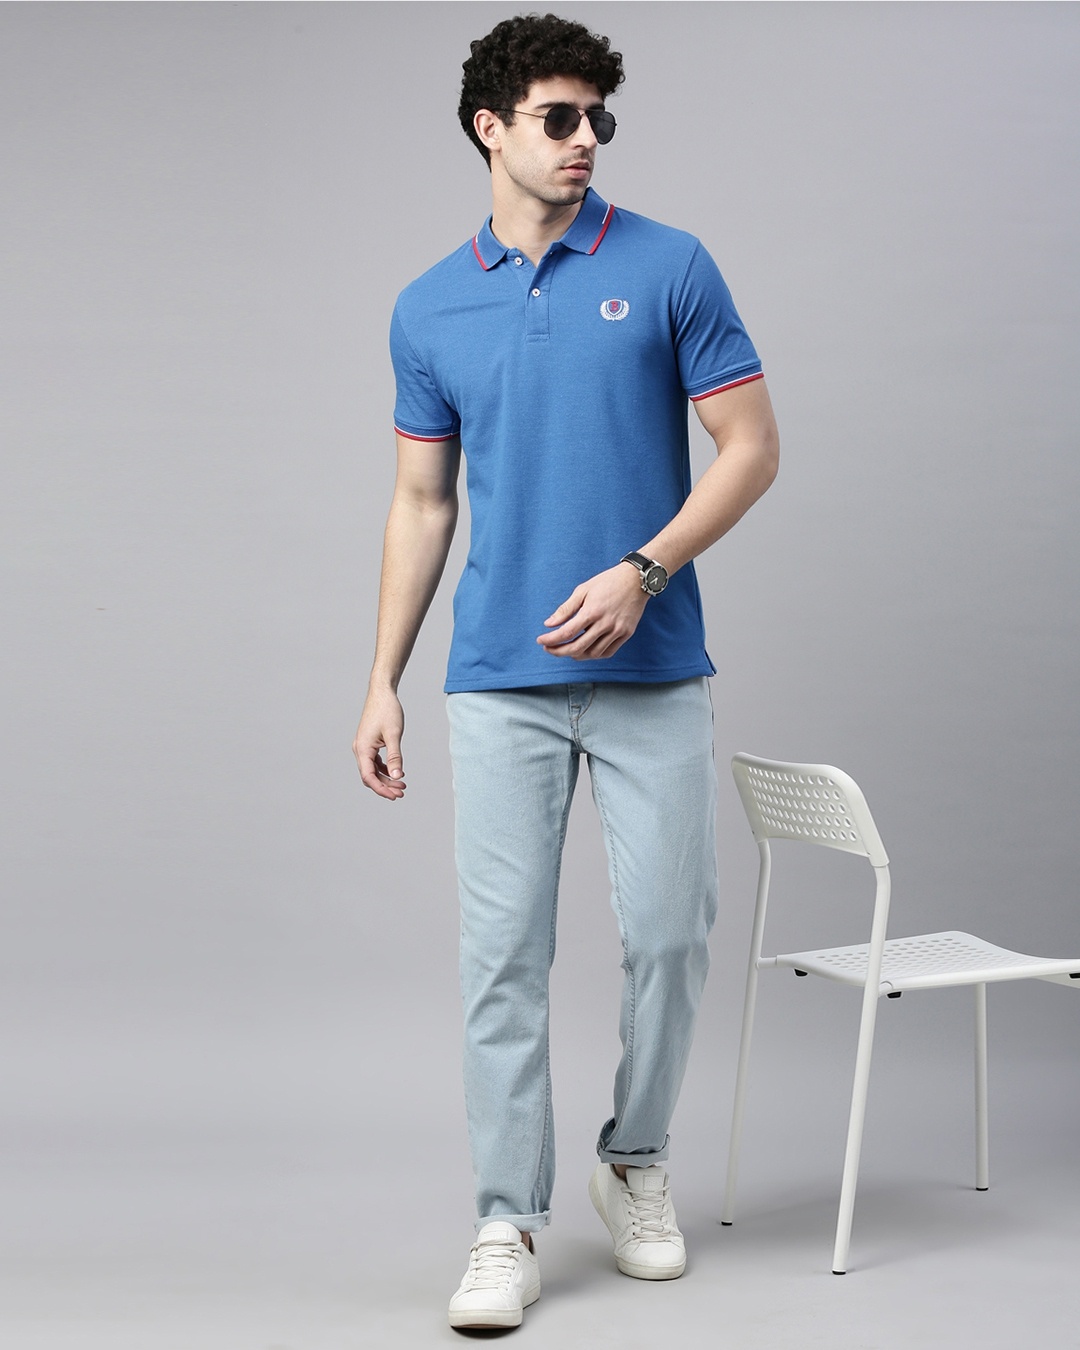 men wearing blue t-shirt combination with jeans